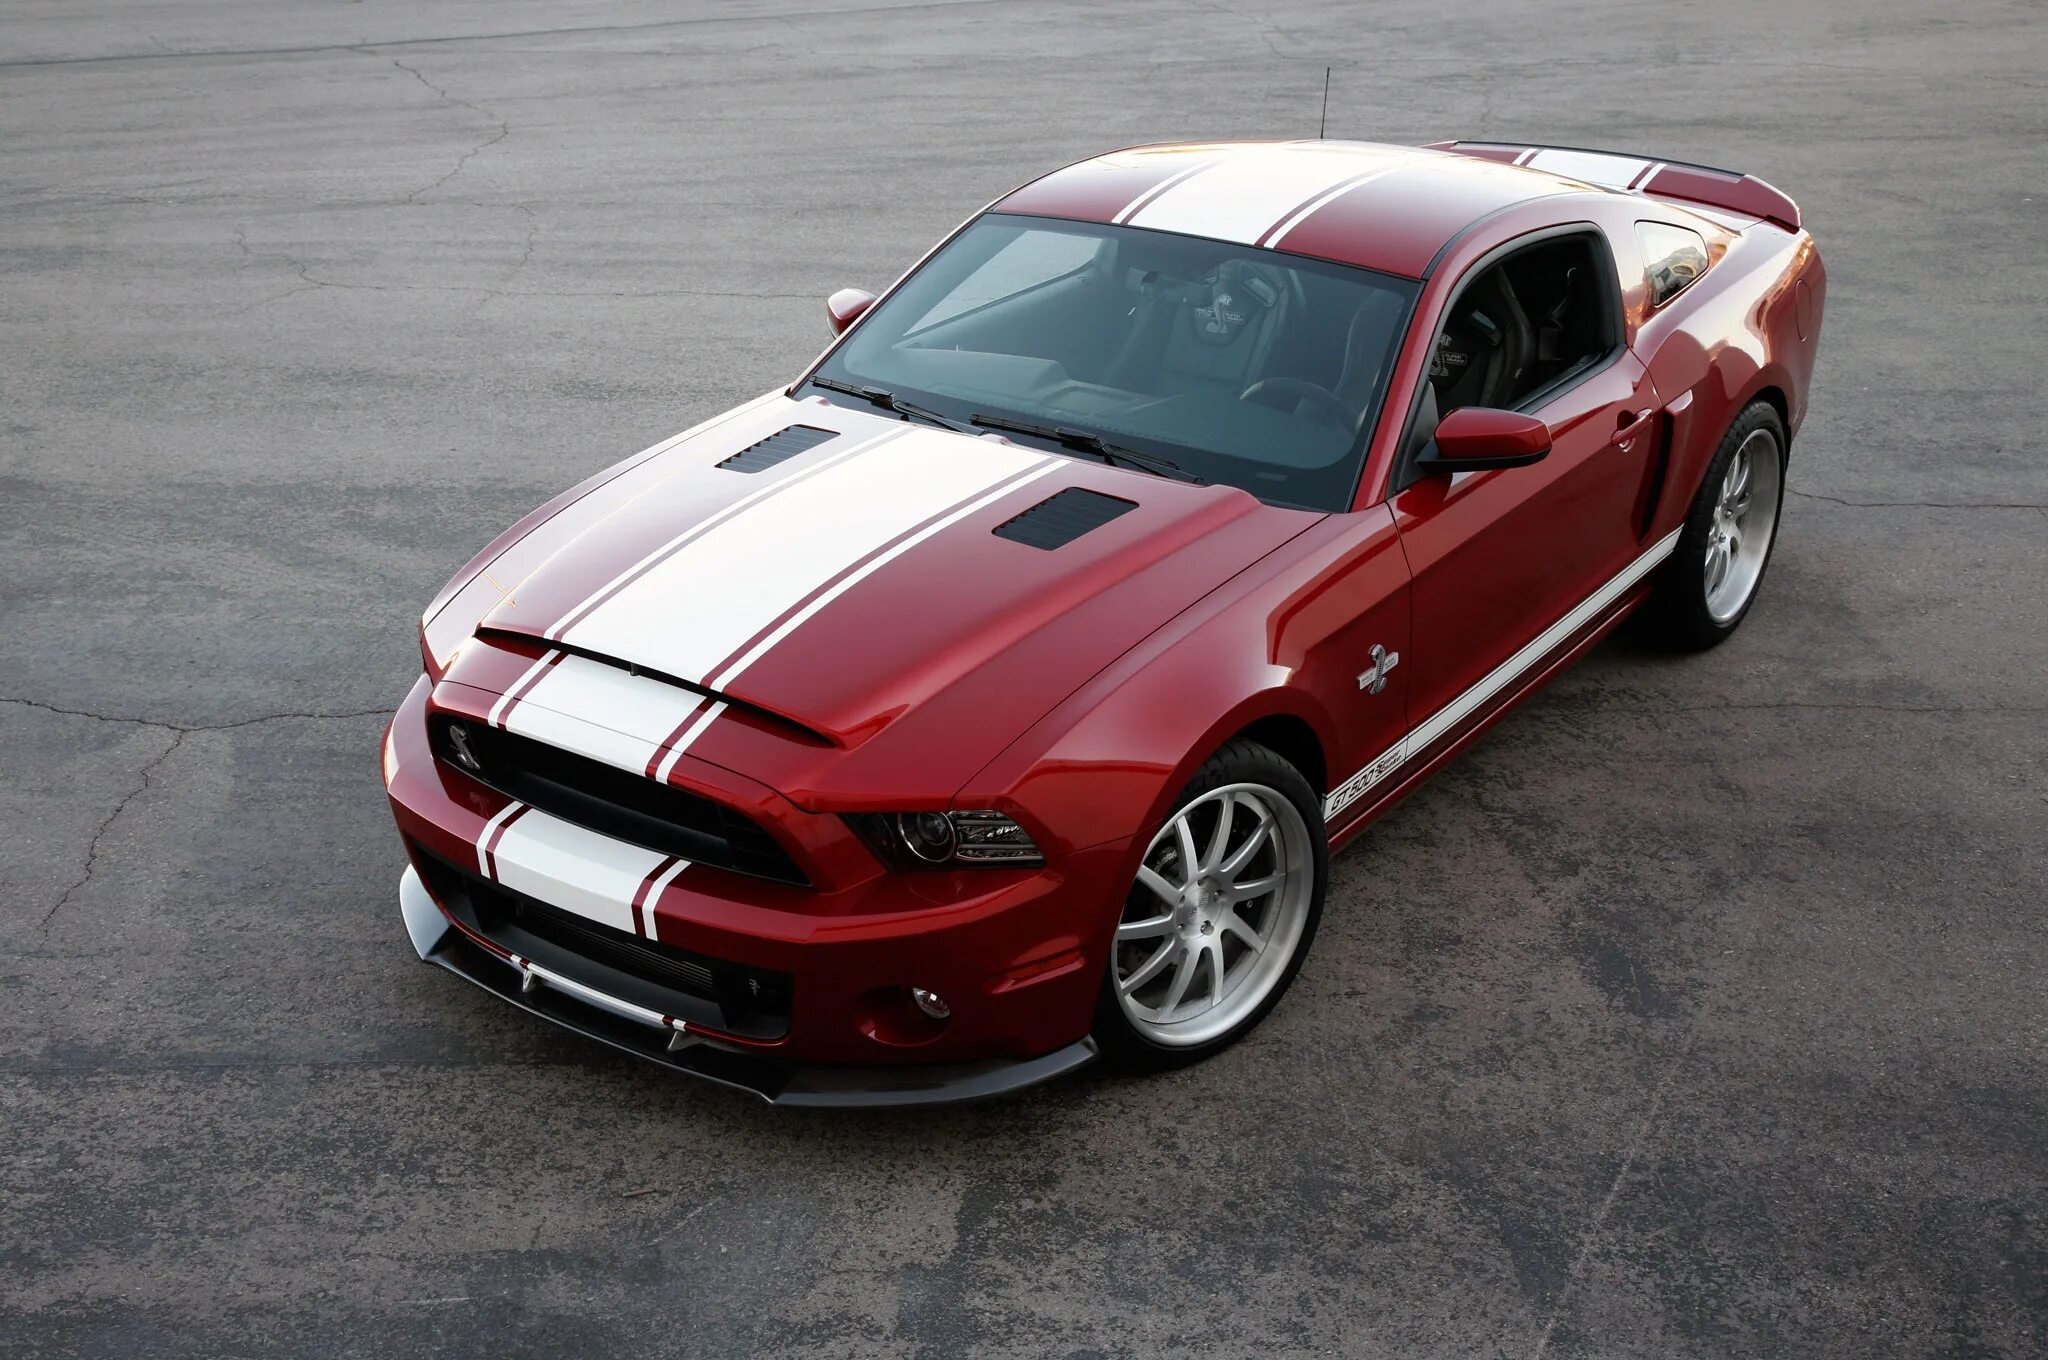 Ford Shelby gt500. Форд Мустанг Шелби 500. Форд Мустанг gt 500. Форд Мустанг Шелби gt500cr. Mustang shelby gt